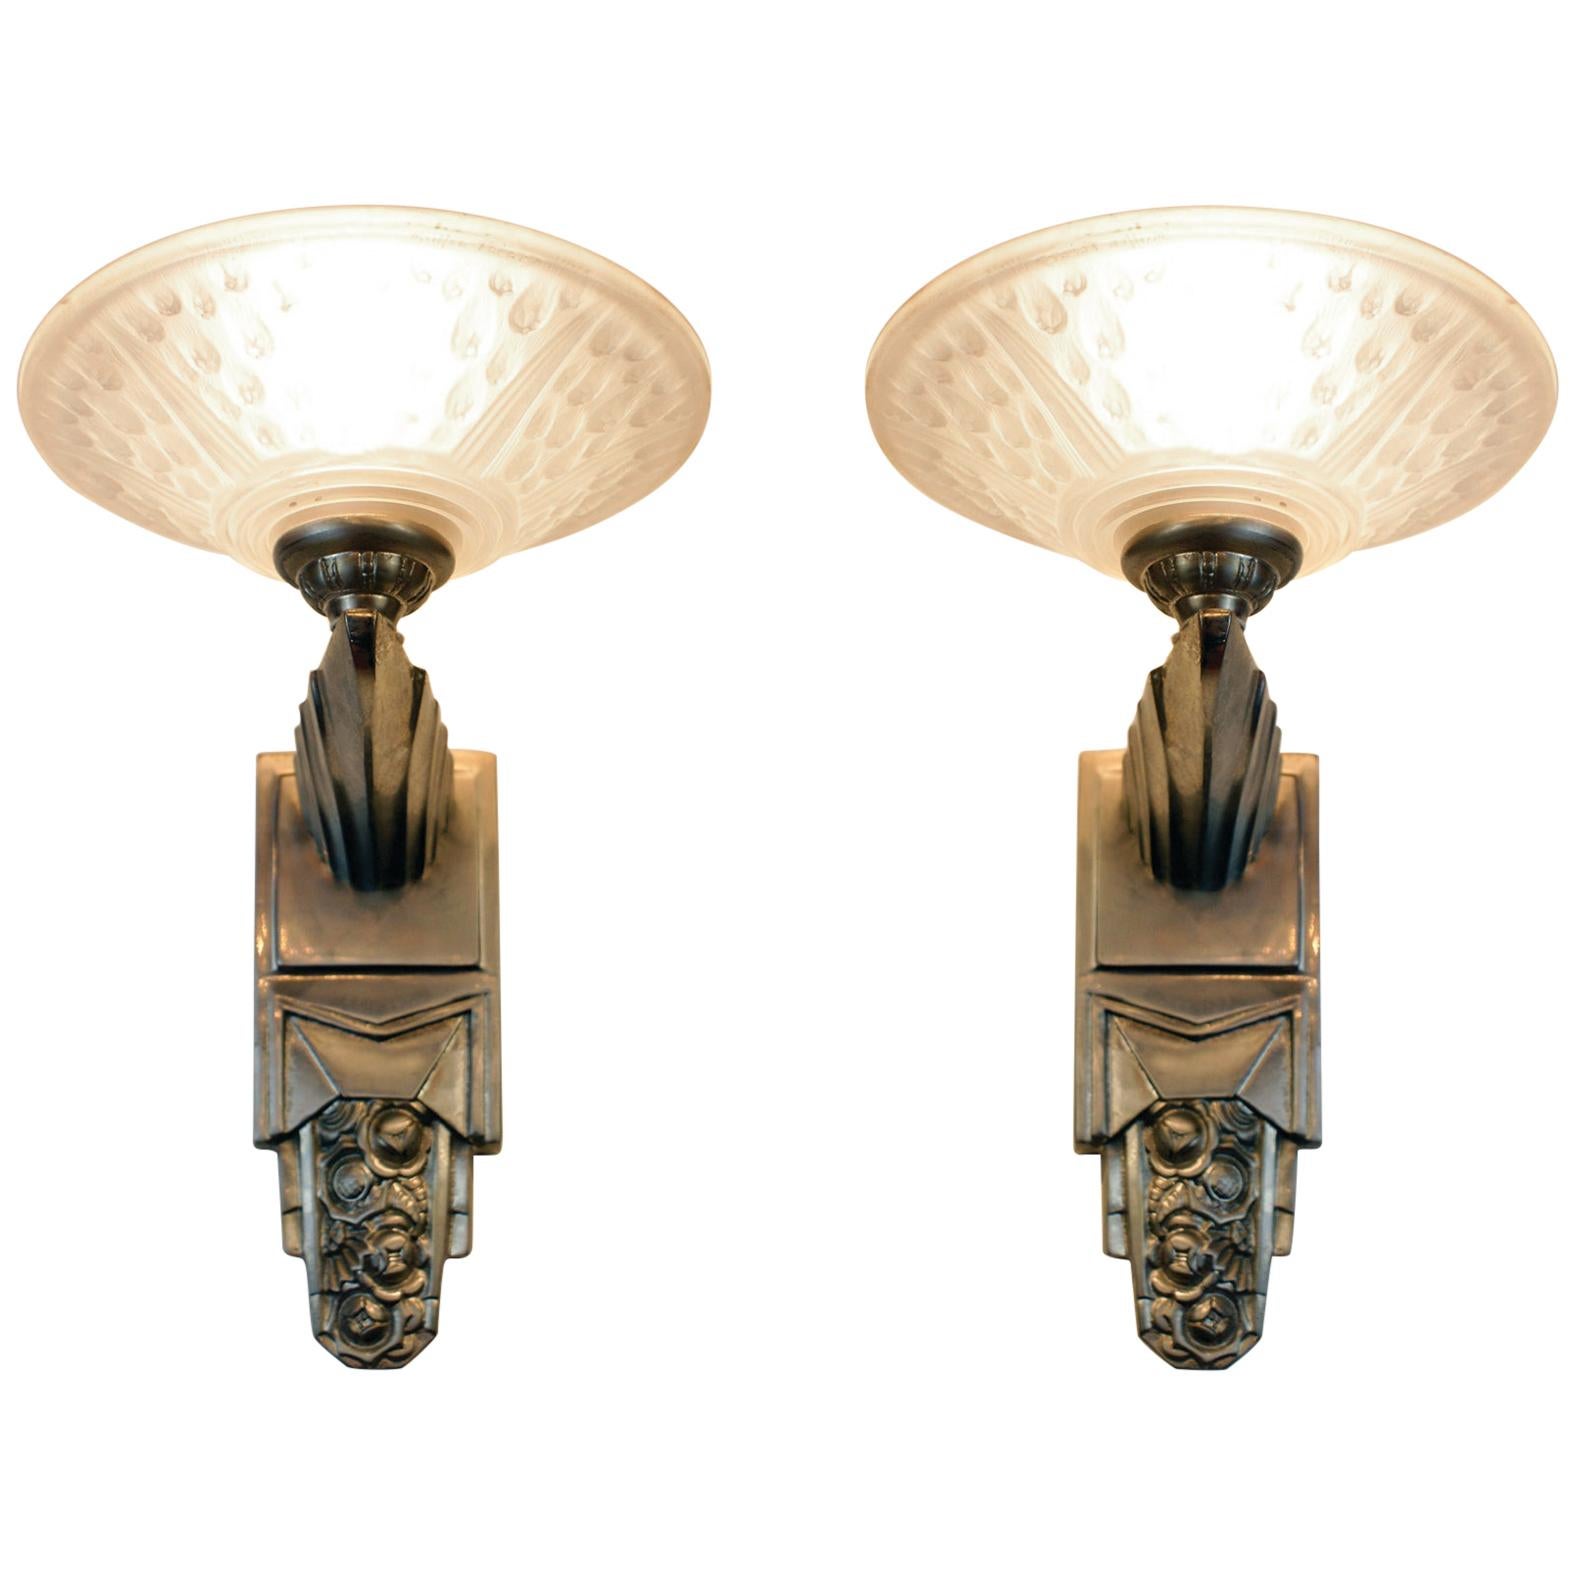 Gorgeous Pair of French Art Deco Sconces Signed Muller Frères Luneville